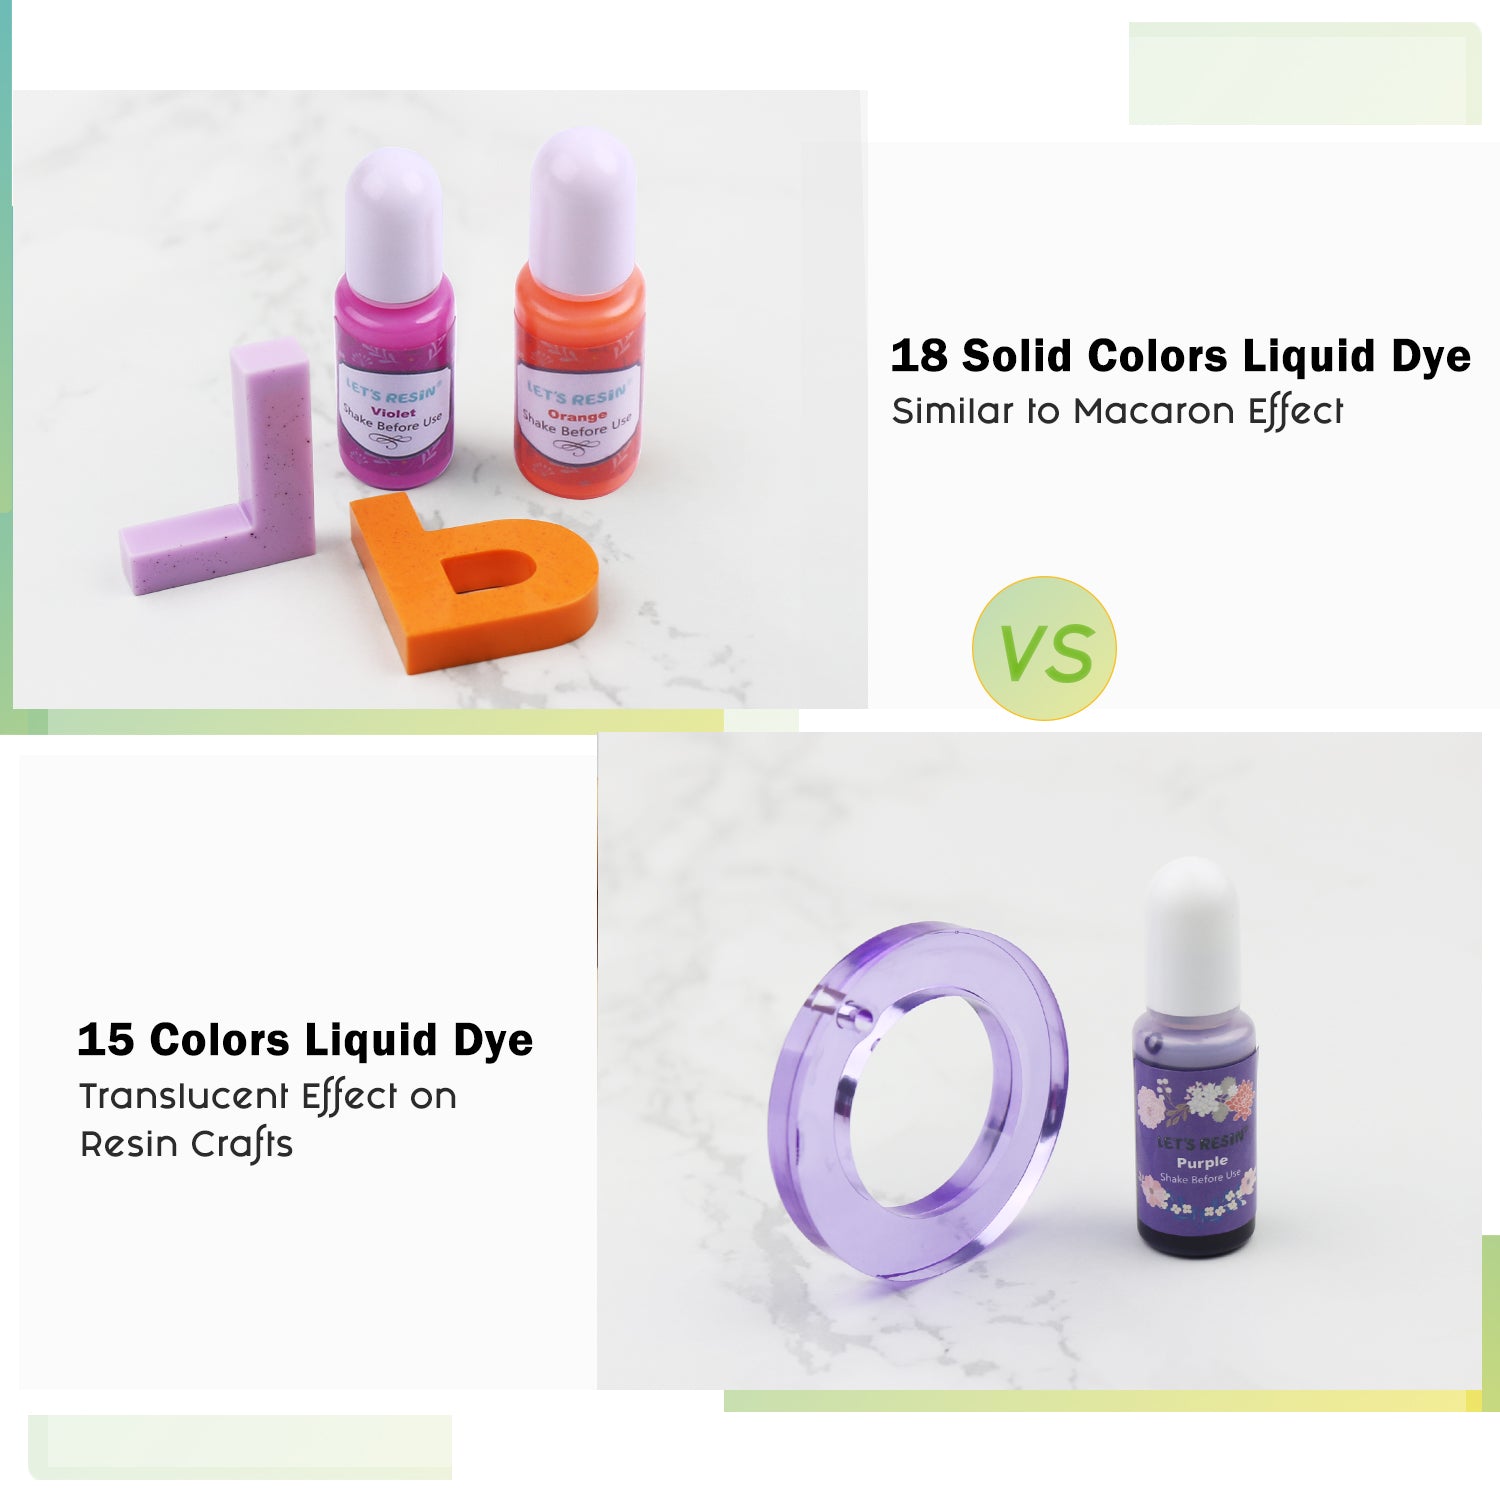 Let's Resin Translucent Liquid Resin Dye, 16 Color Concentrated Epoxy Resin Paint,Resin Colorant for Resin Coloring, Resin Jewelry